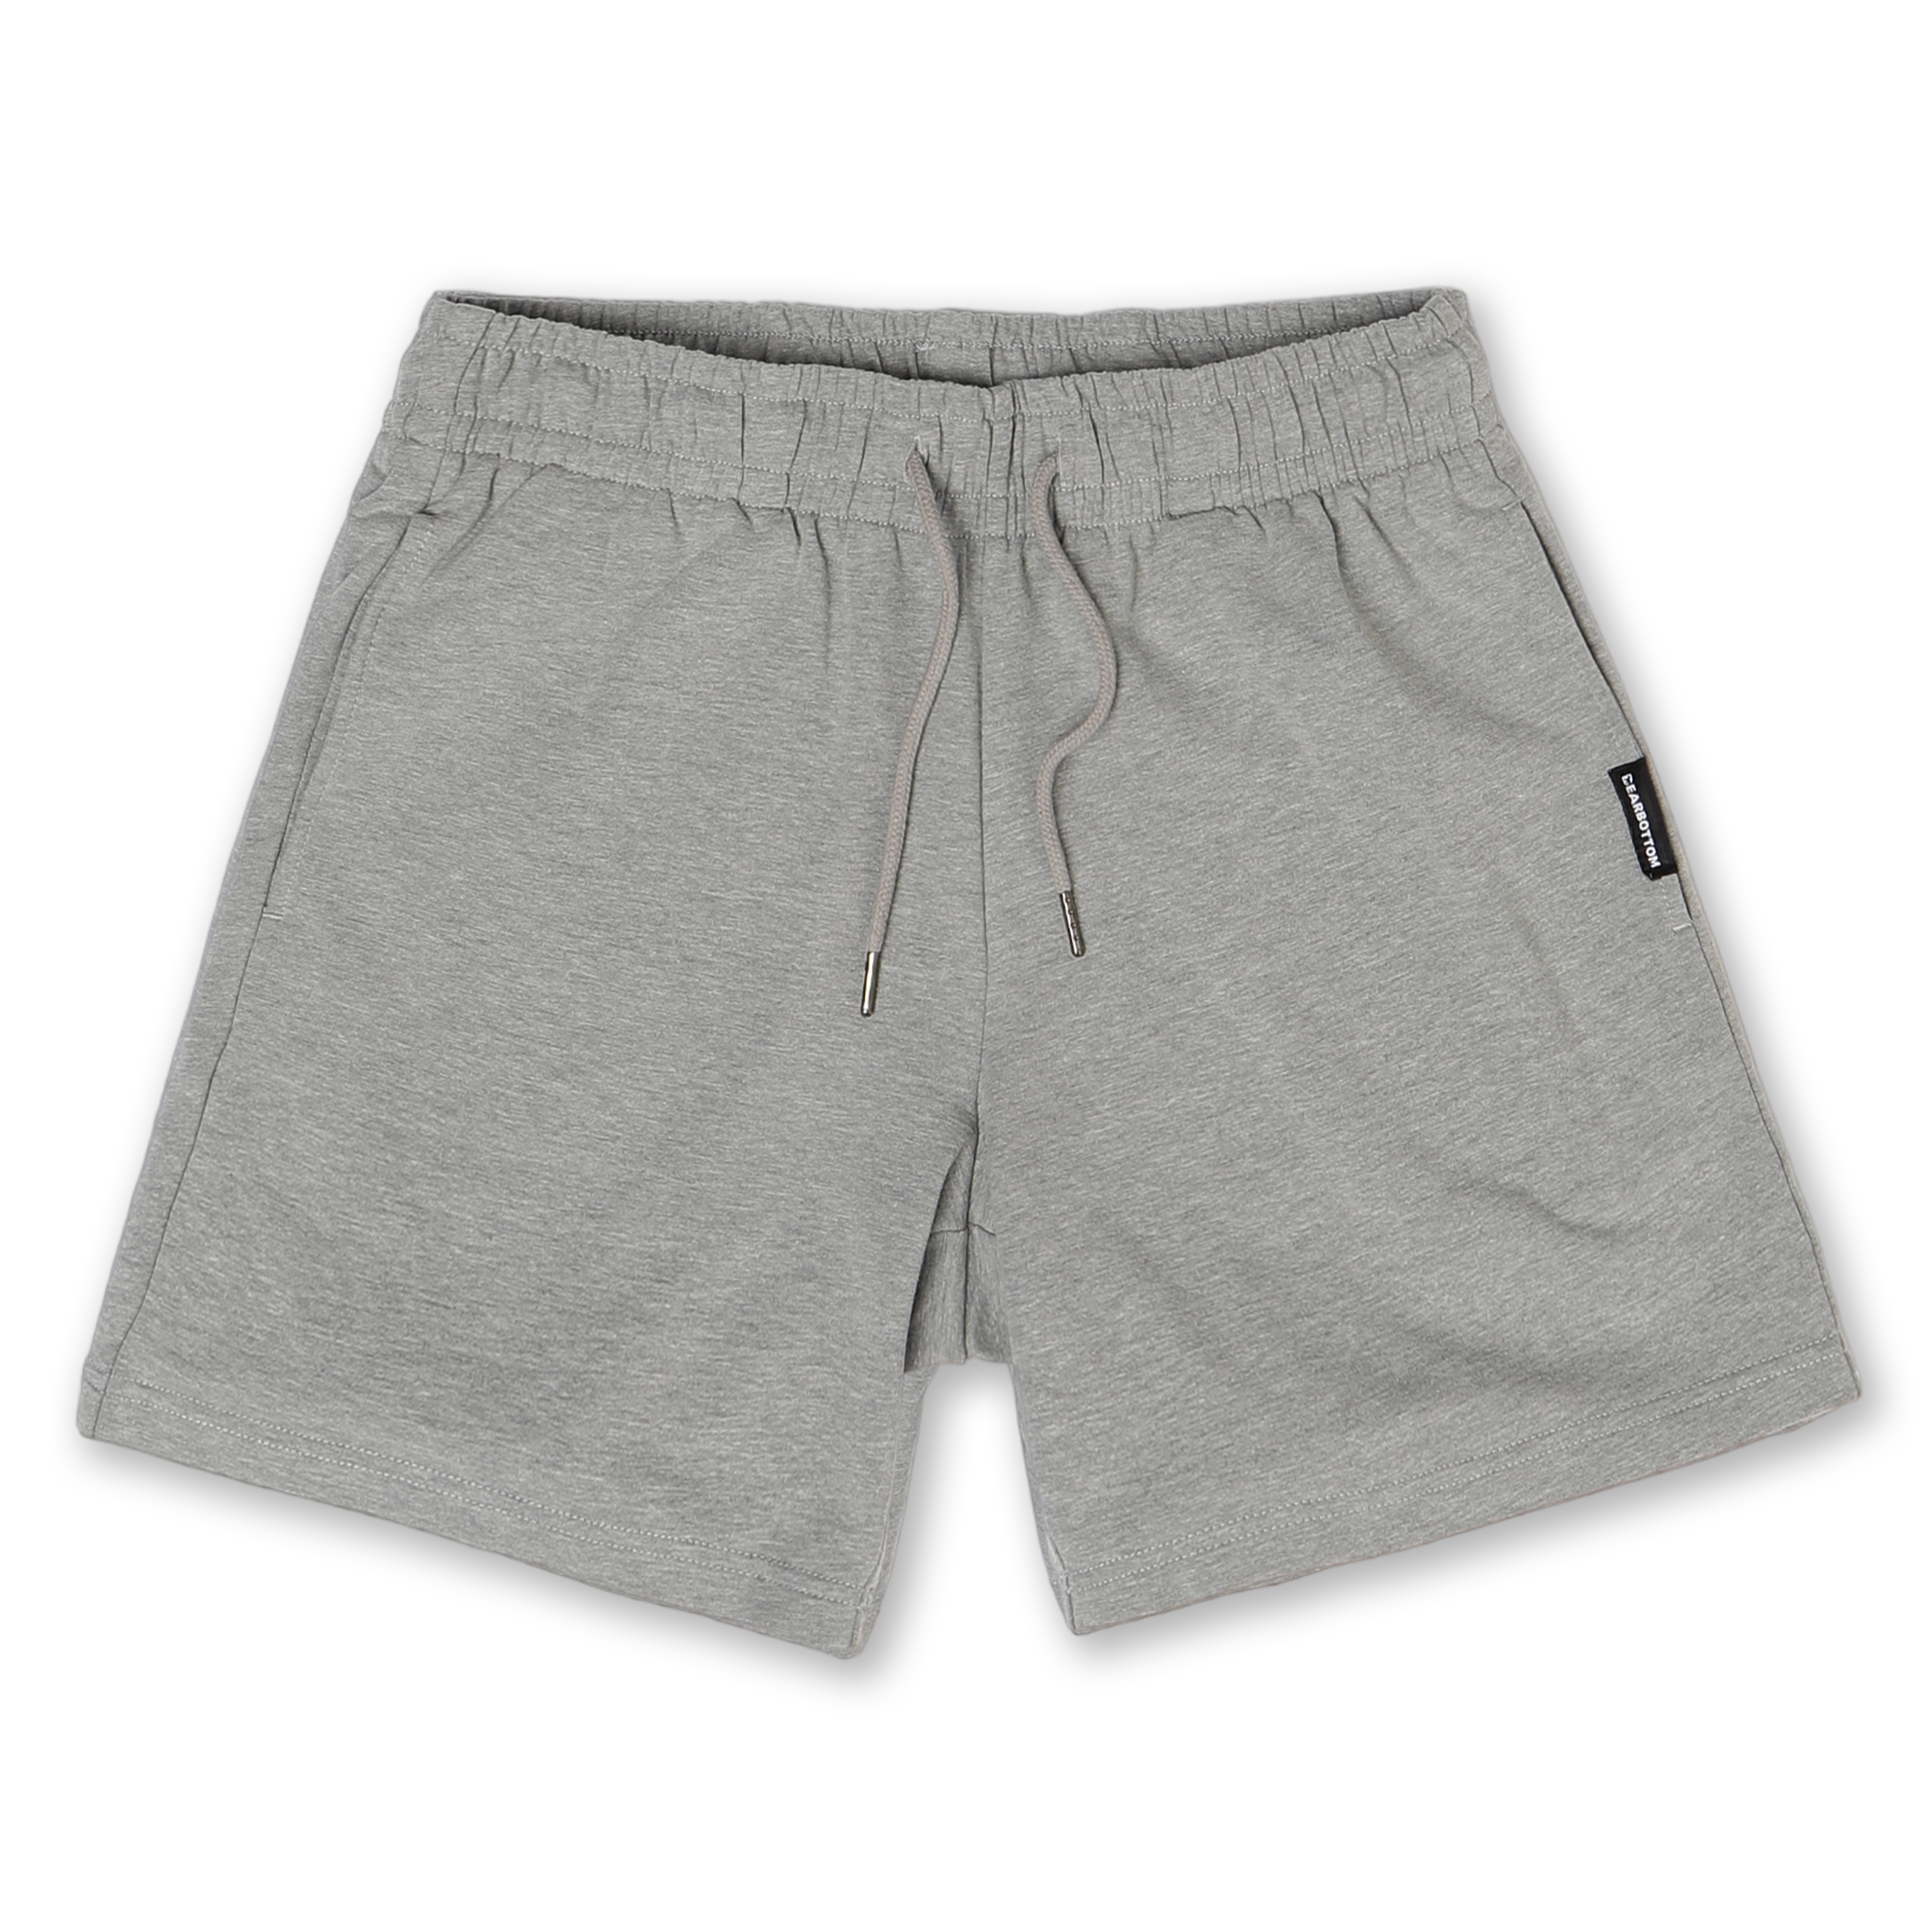 Loft Short 5.5" Heather Grey front with elastic waistband, fabric drawstring with metal tips, and two inseam pockets